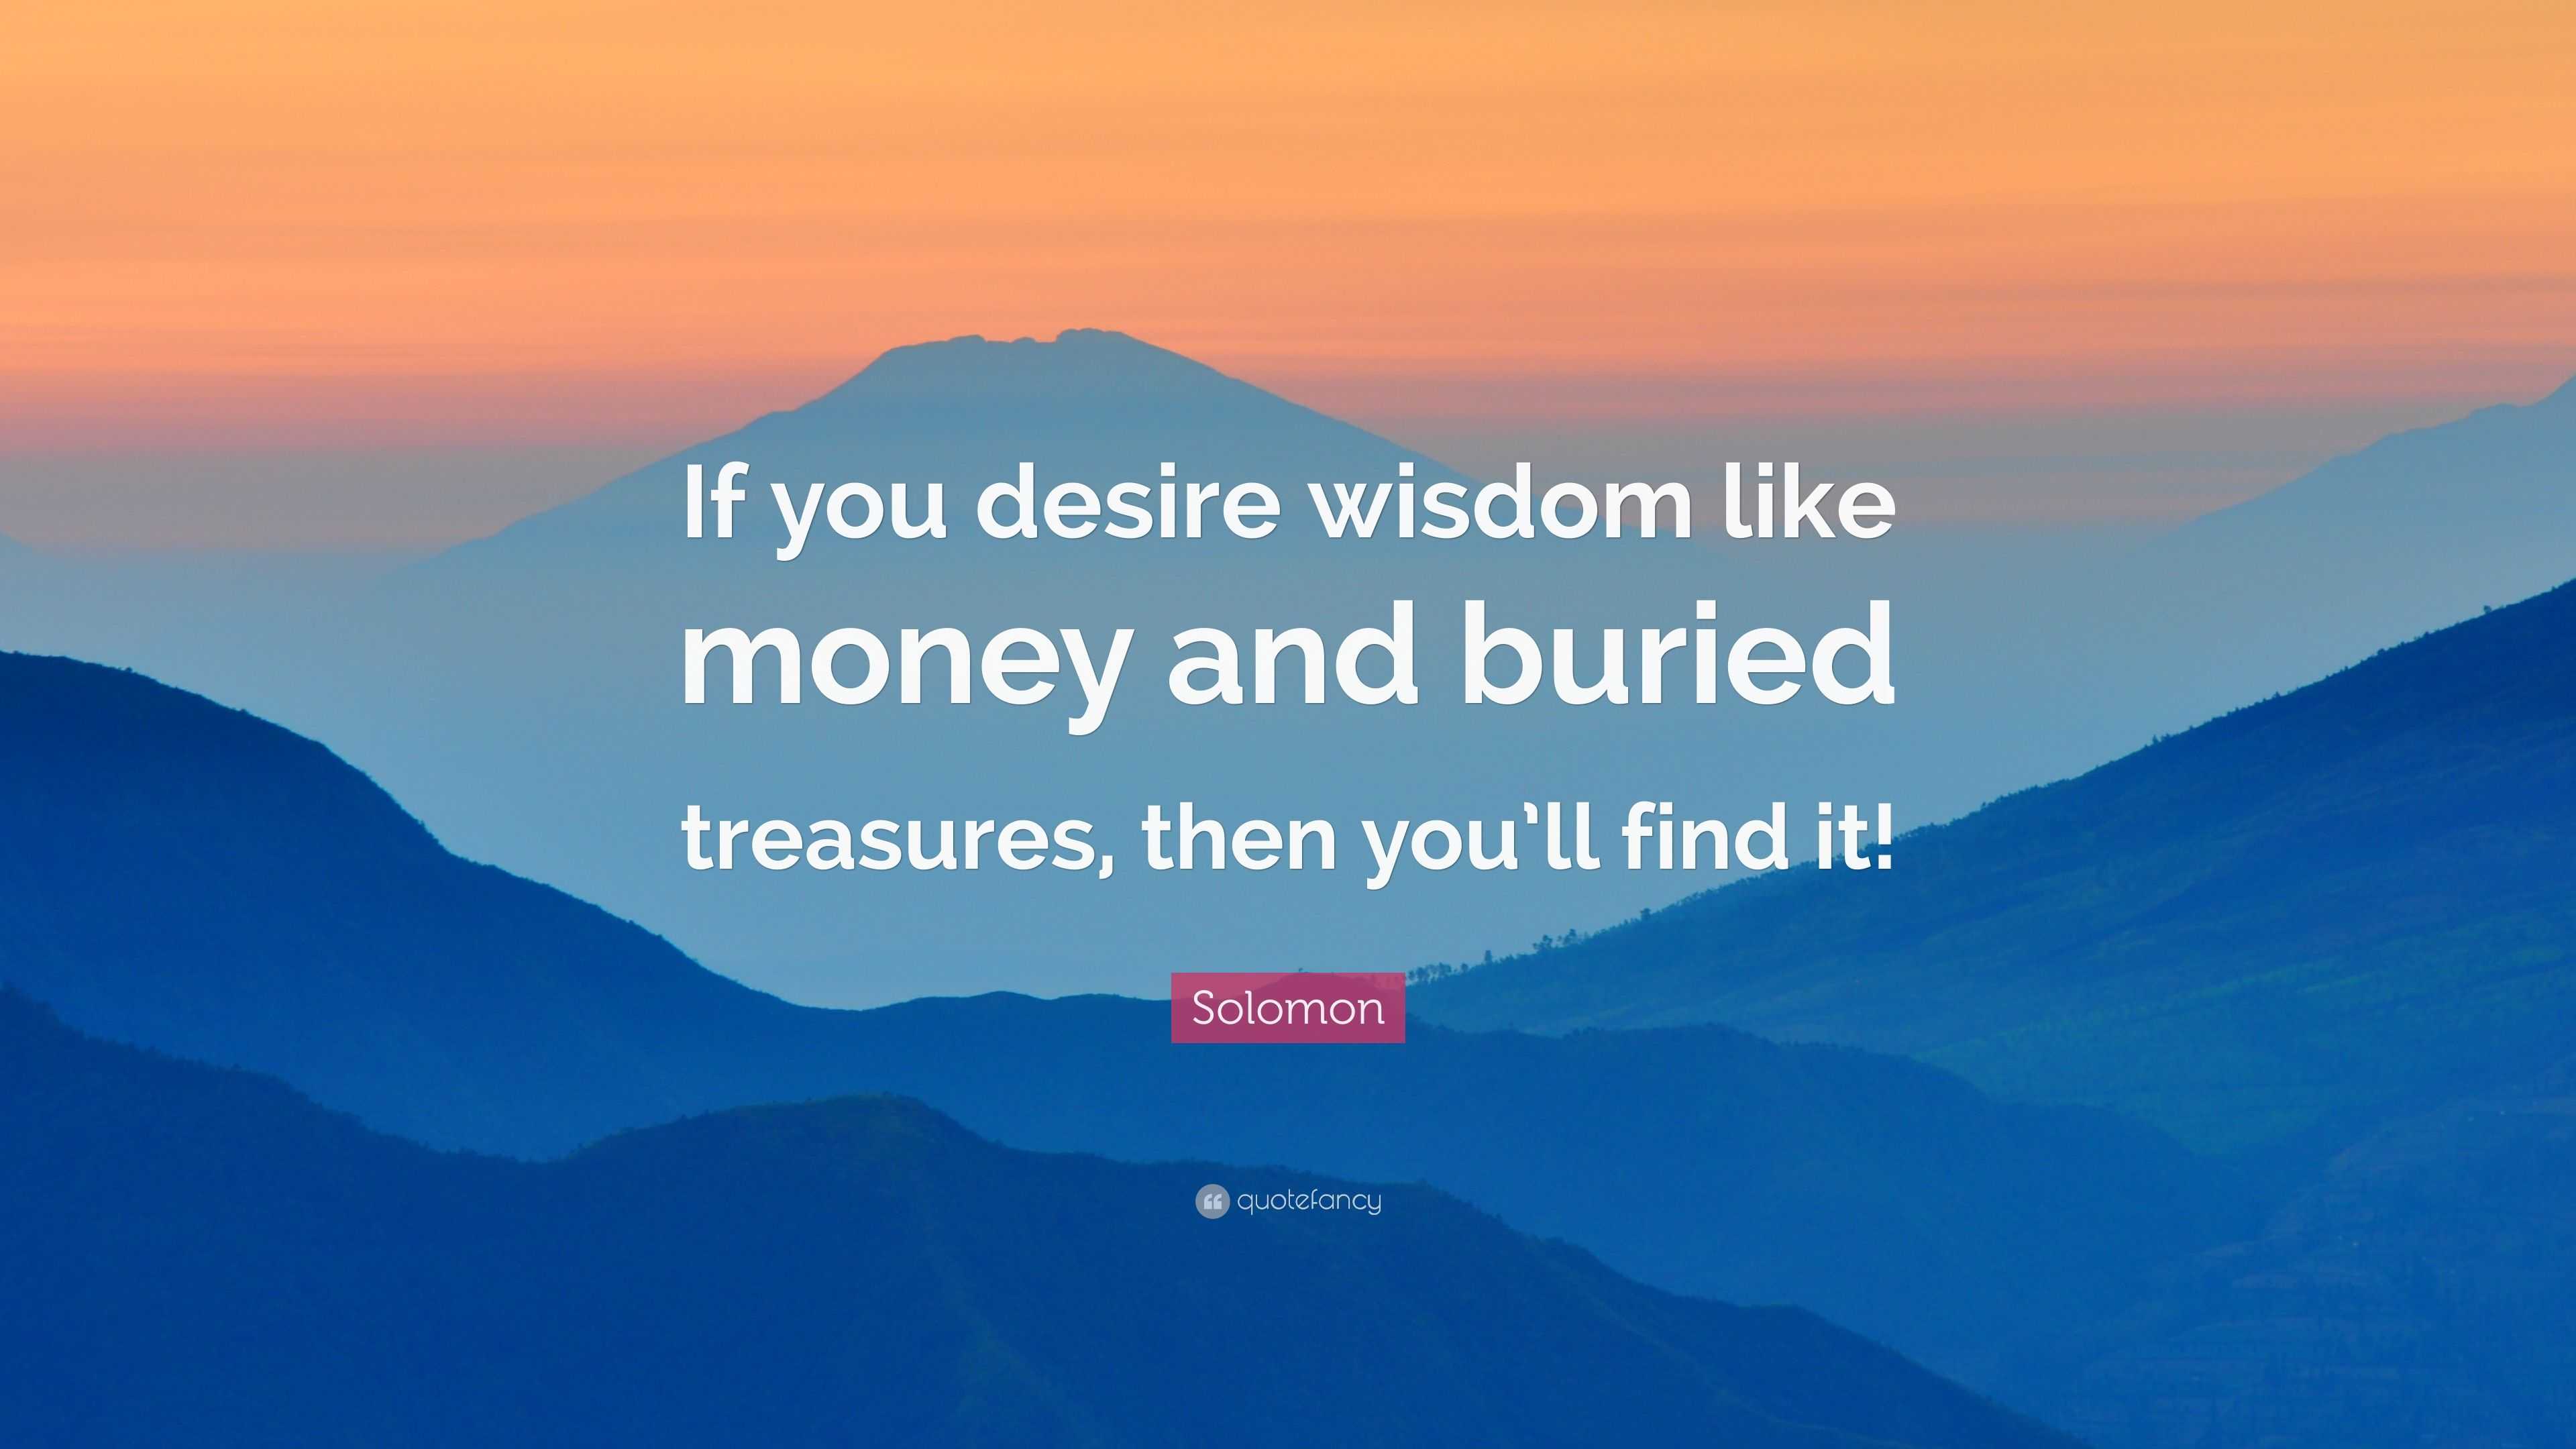 Solomon Quote: “If you desire wisdom like money and buried treasures, then  you'll find it!”